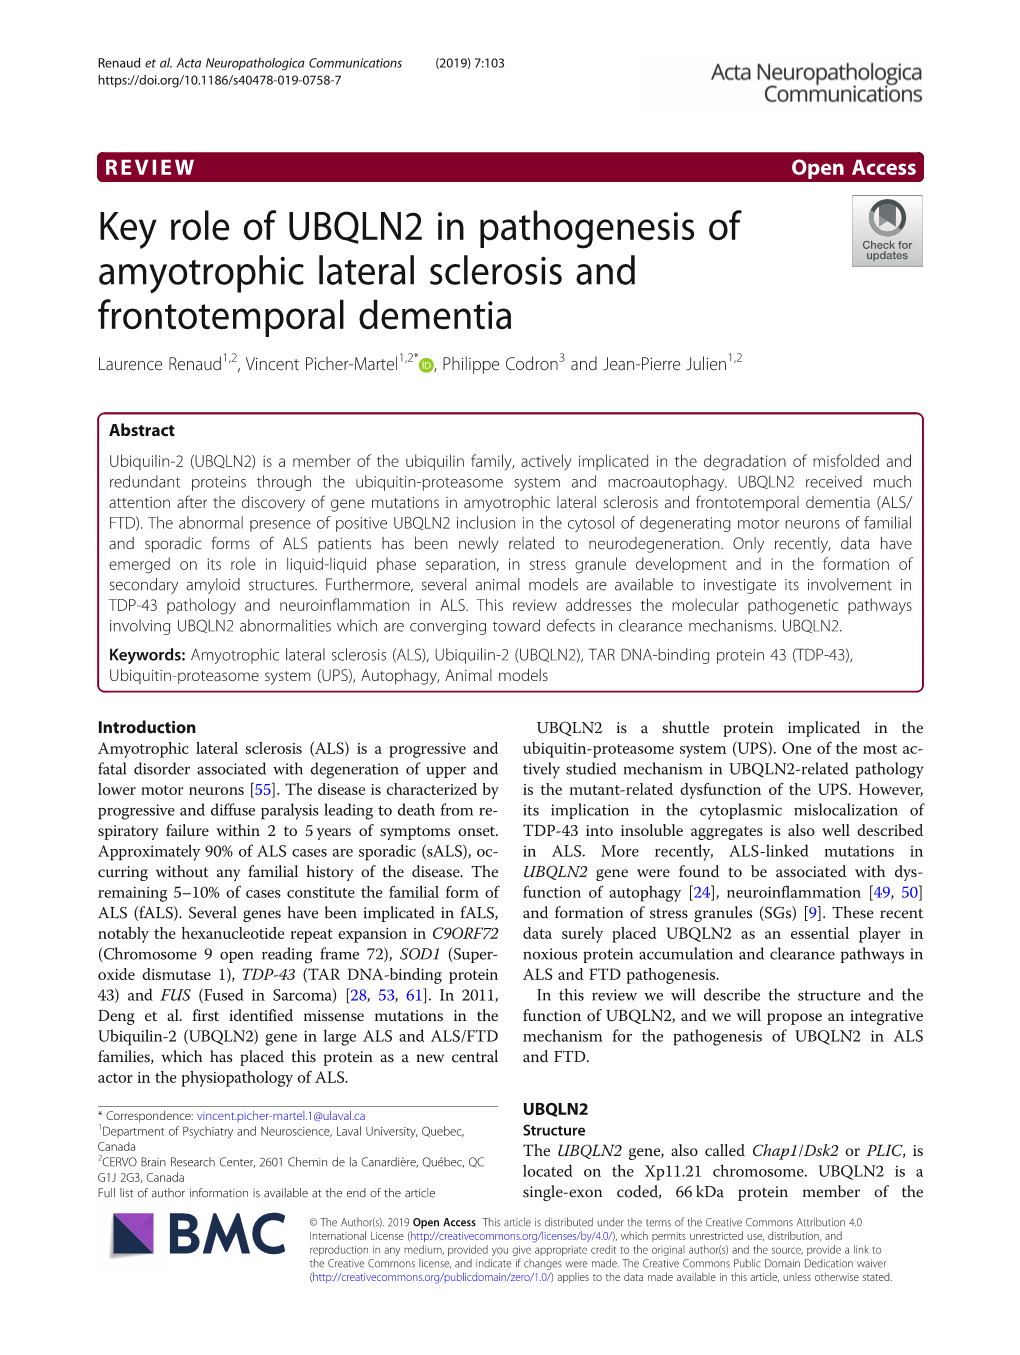 Key Role of UBQLN2 in Pathogenesis of Amyotrophic Lateral Sclerosis And